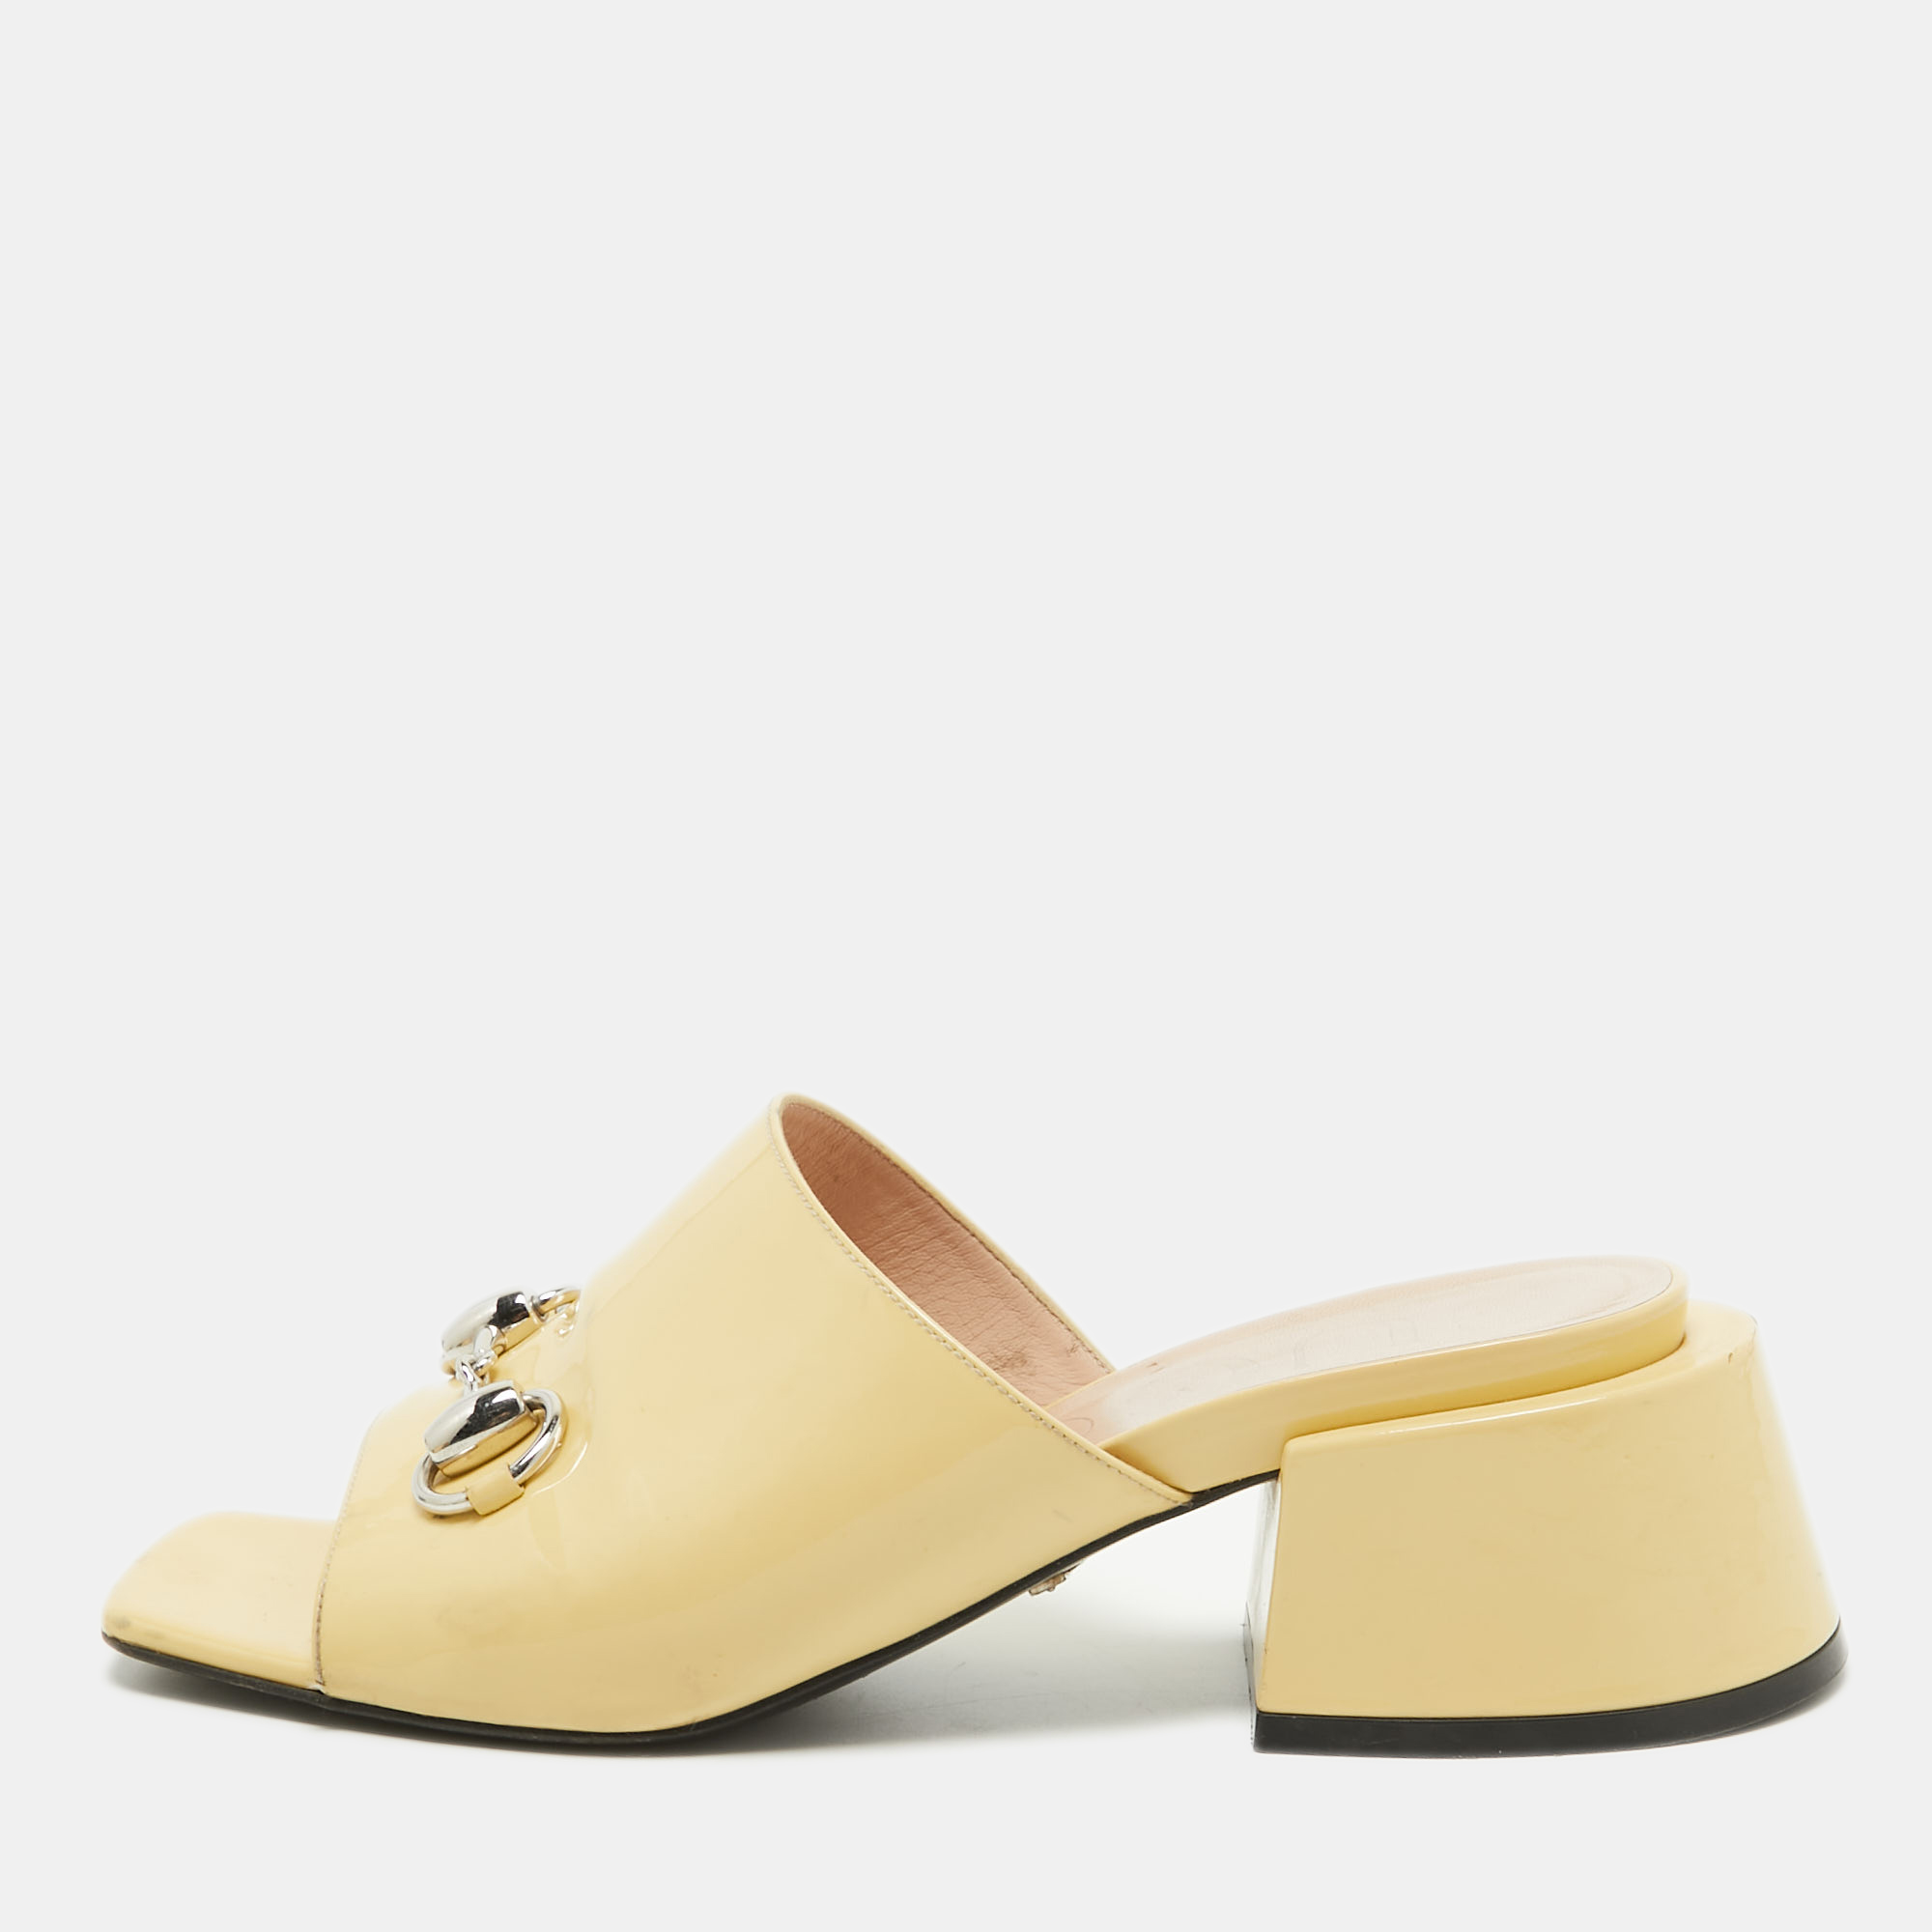 Gucci yellow patent leather lexi slide sandals size 36